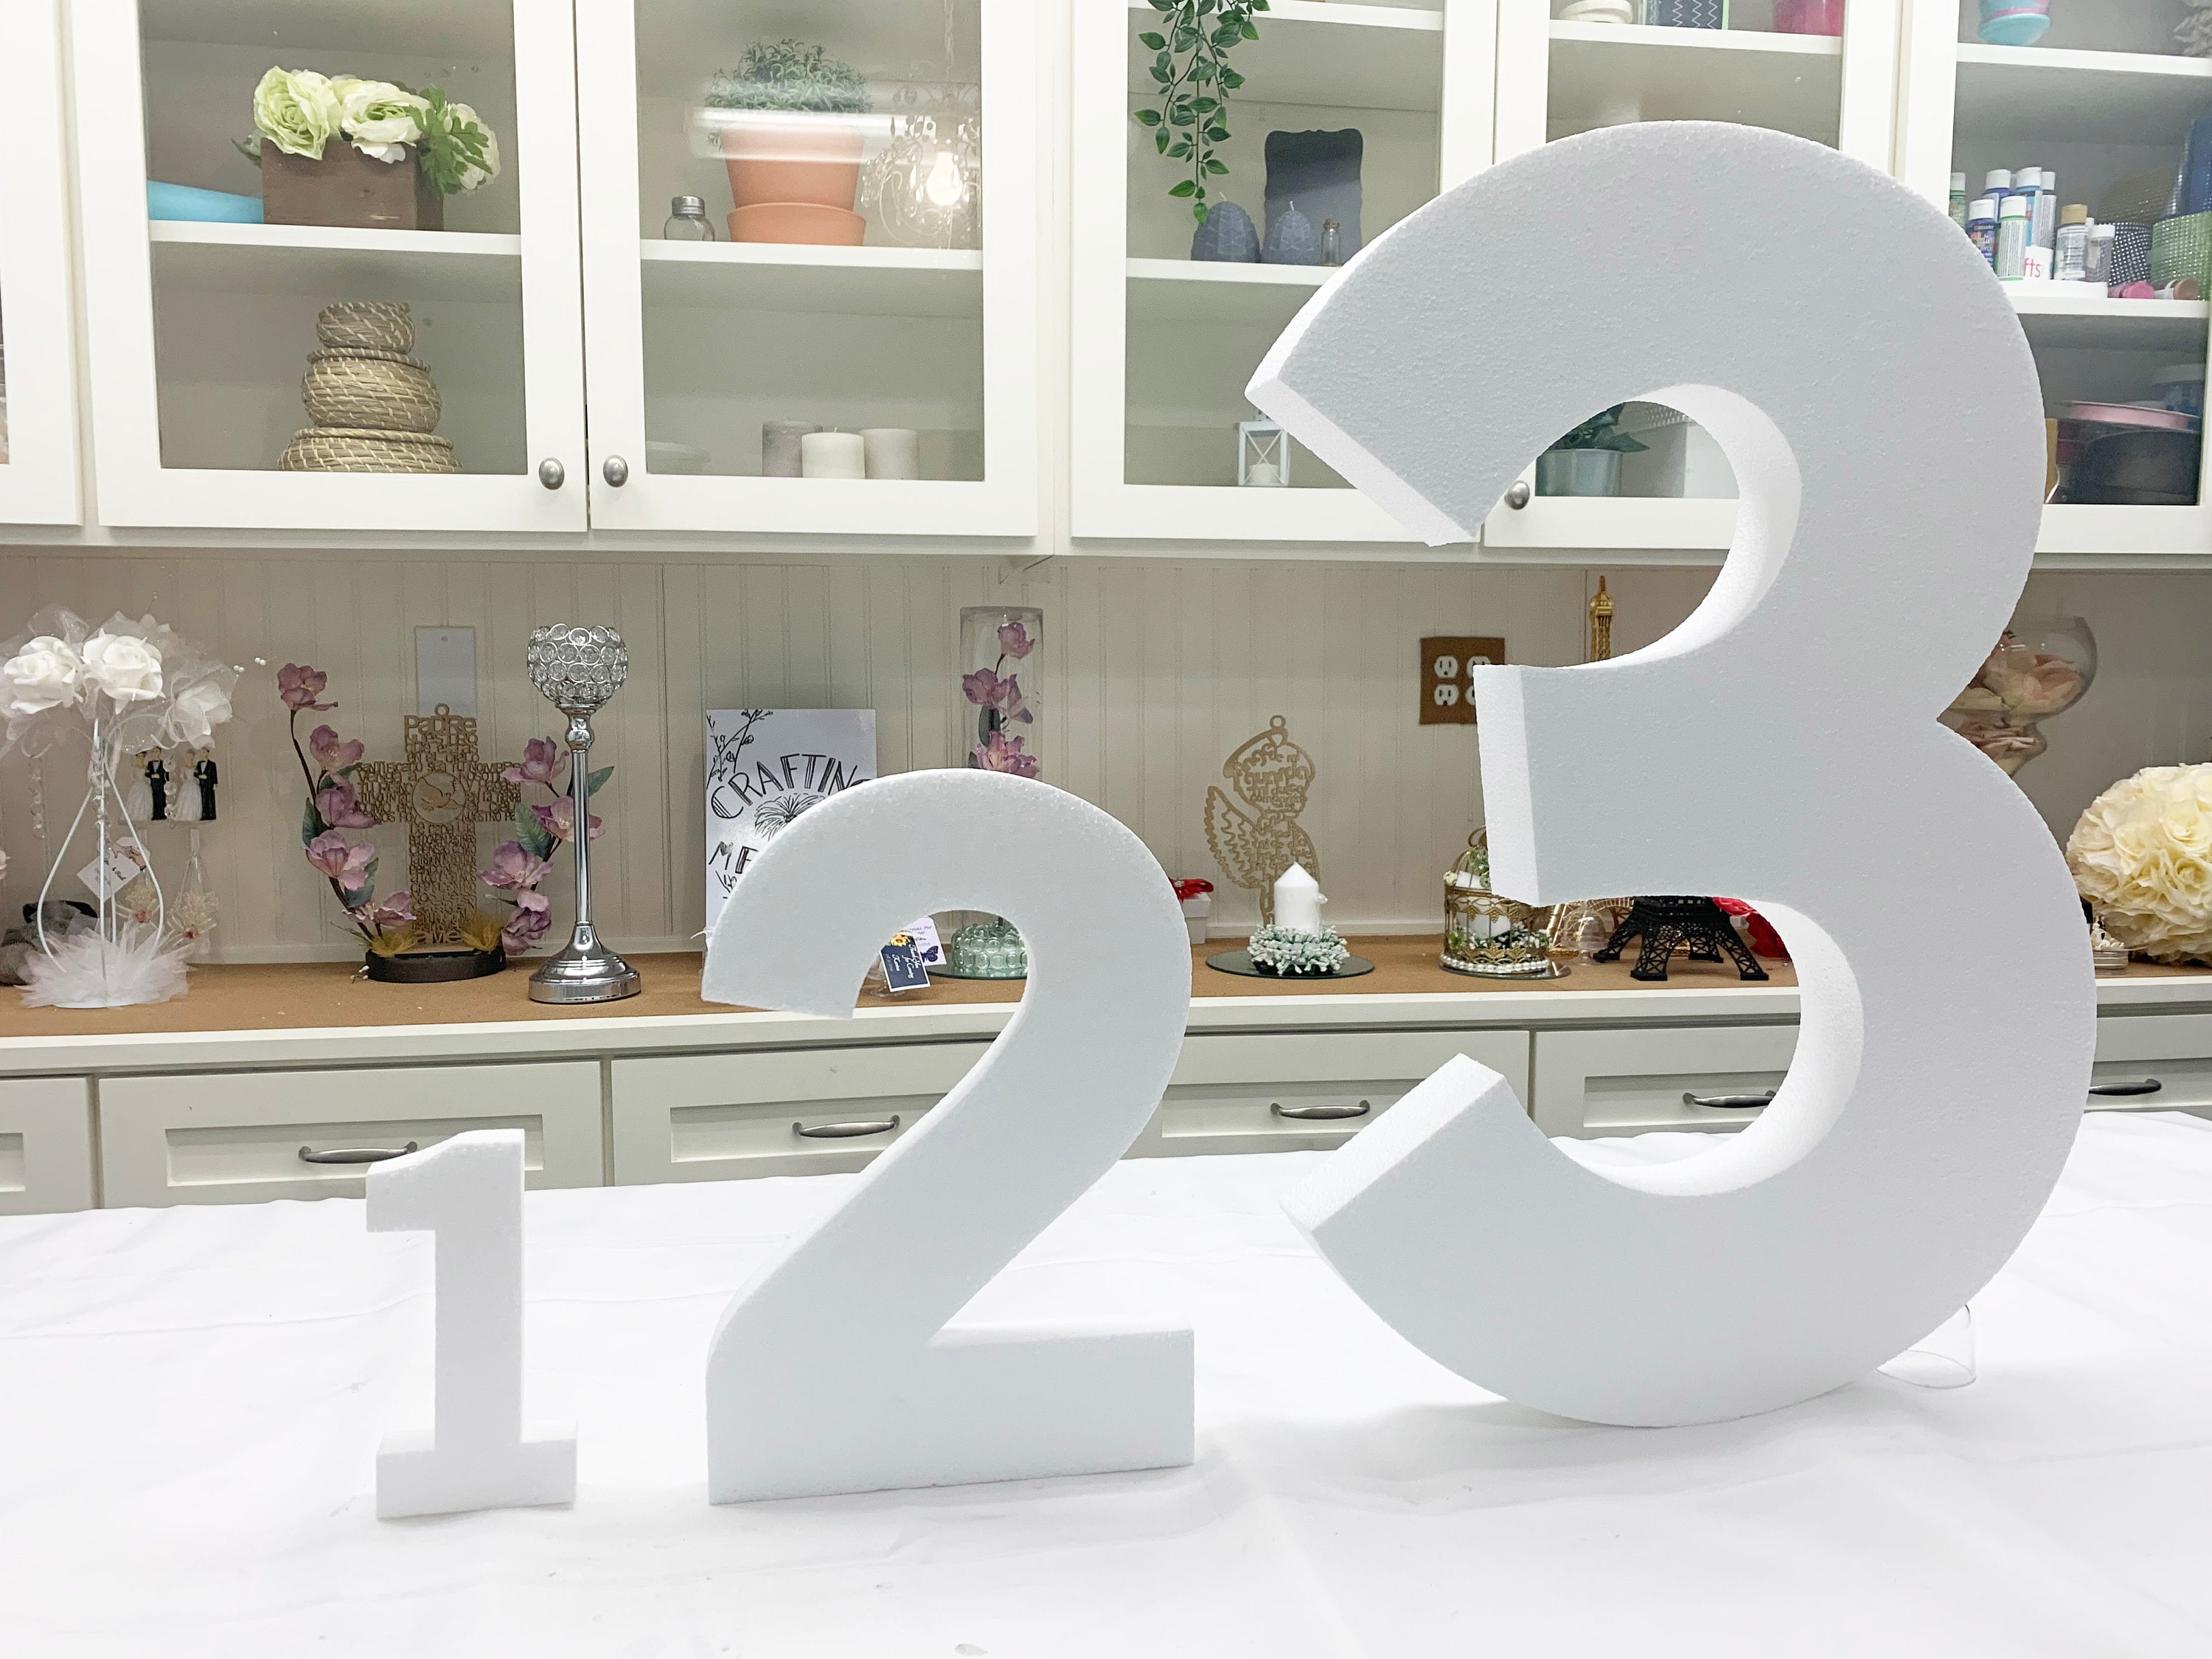 24 inch inch Large Foam Numbers (Number - 8)